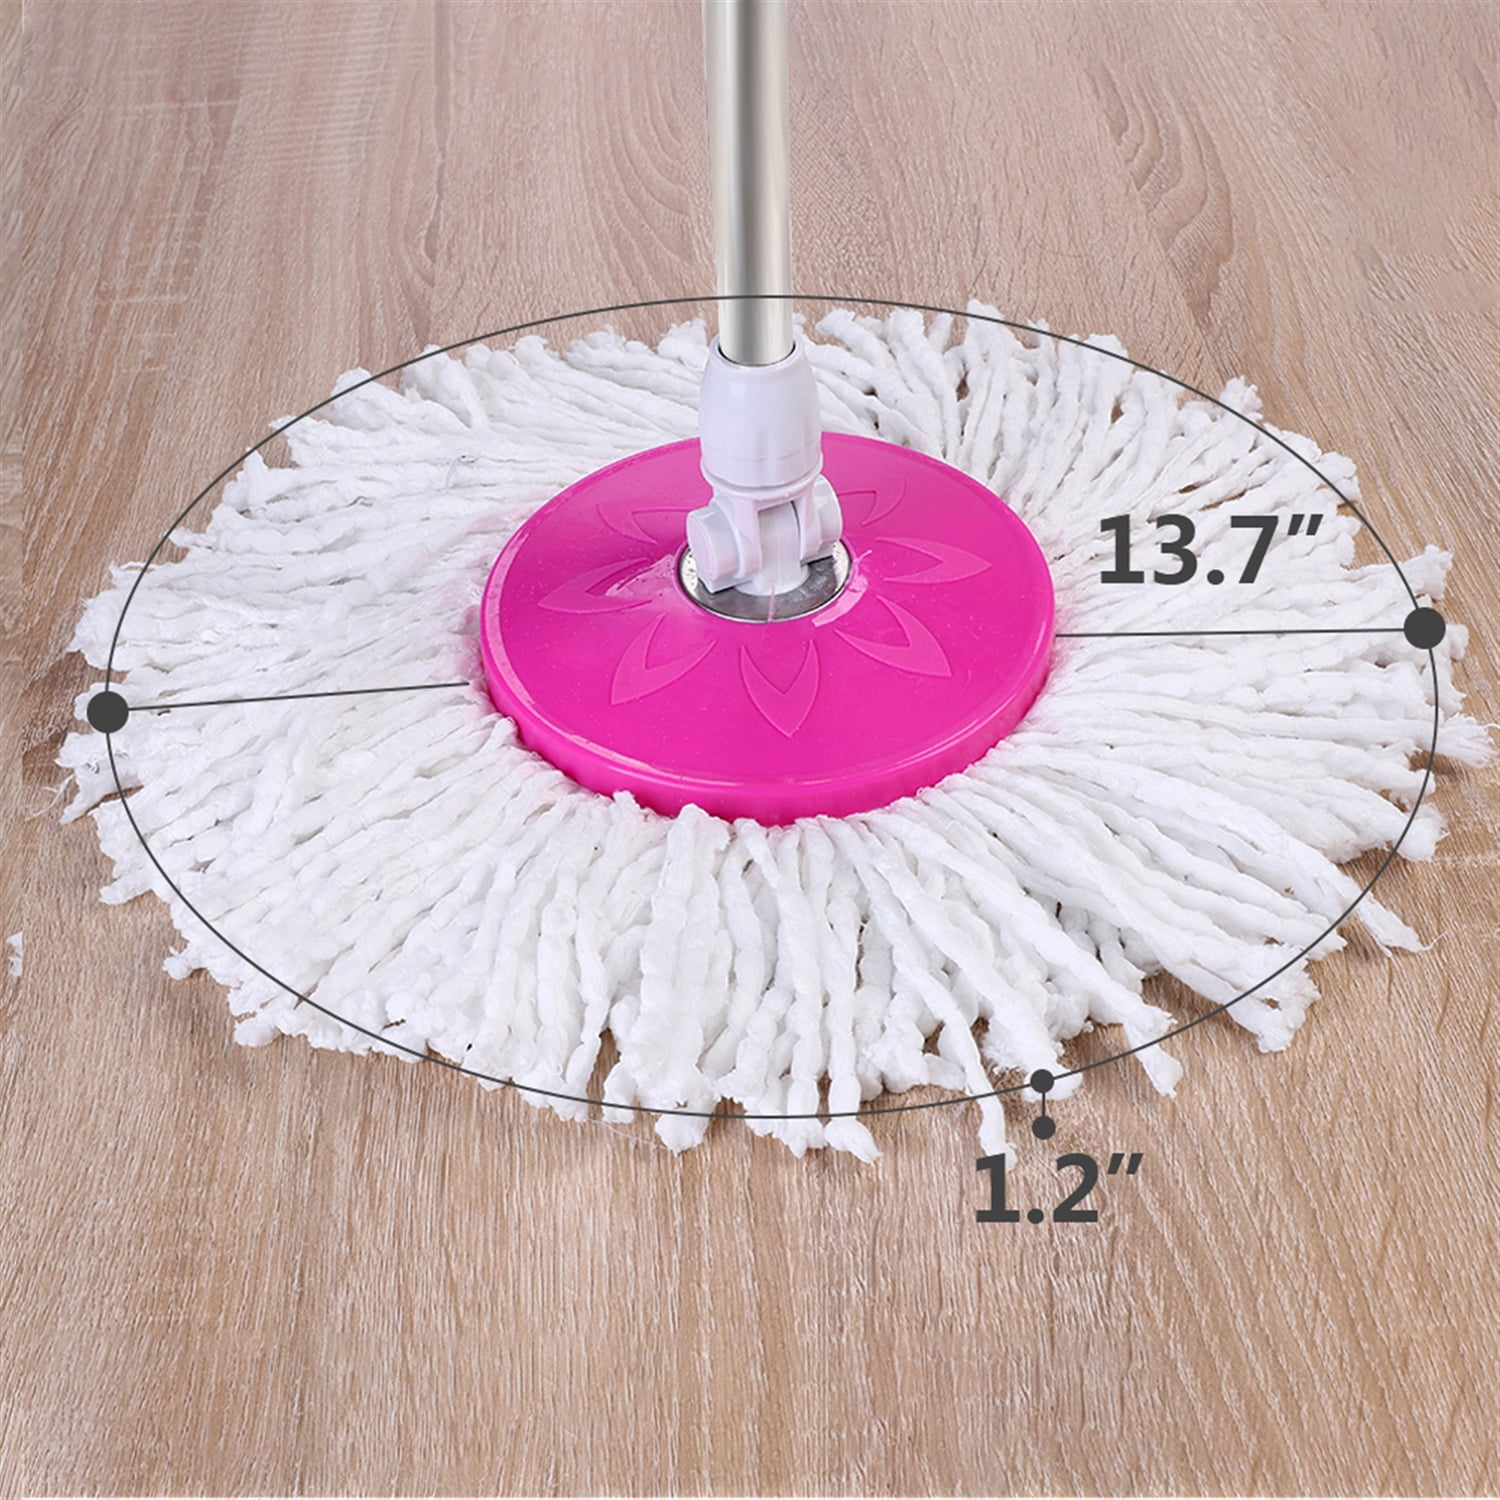 Lowestbest Spin Mop & Bucket System, 360° Rotation Floor Mops for Home, Pink  Easy Press Mops for Floors, Spray Mops for Floors with 2 Cotton Heads, 1 Mop  Rod, 1 Bucket 